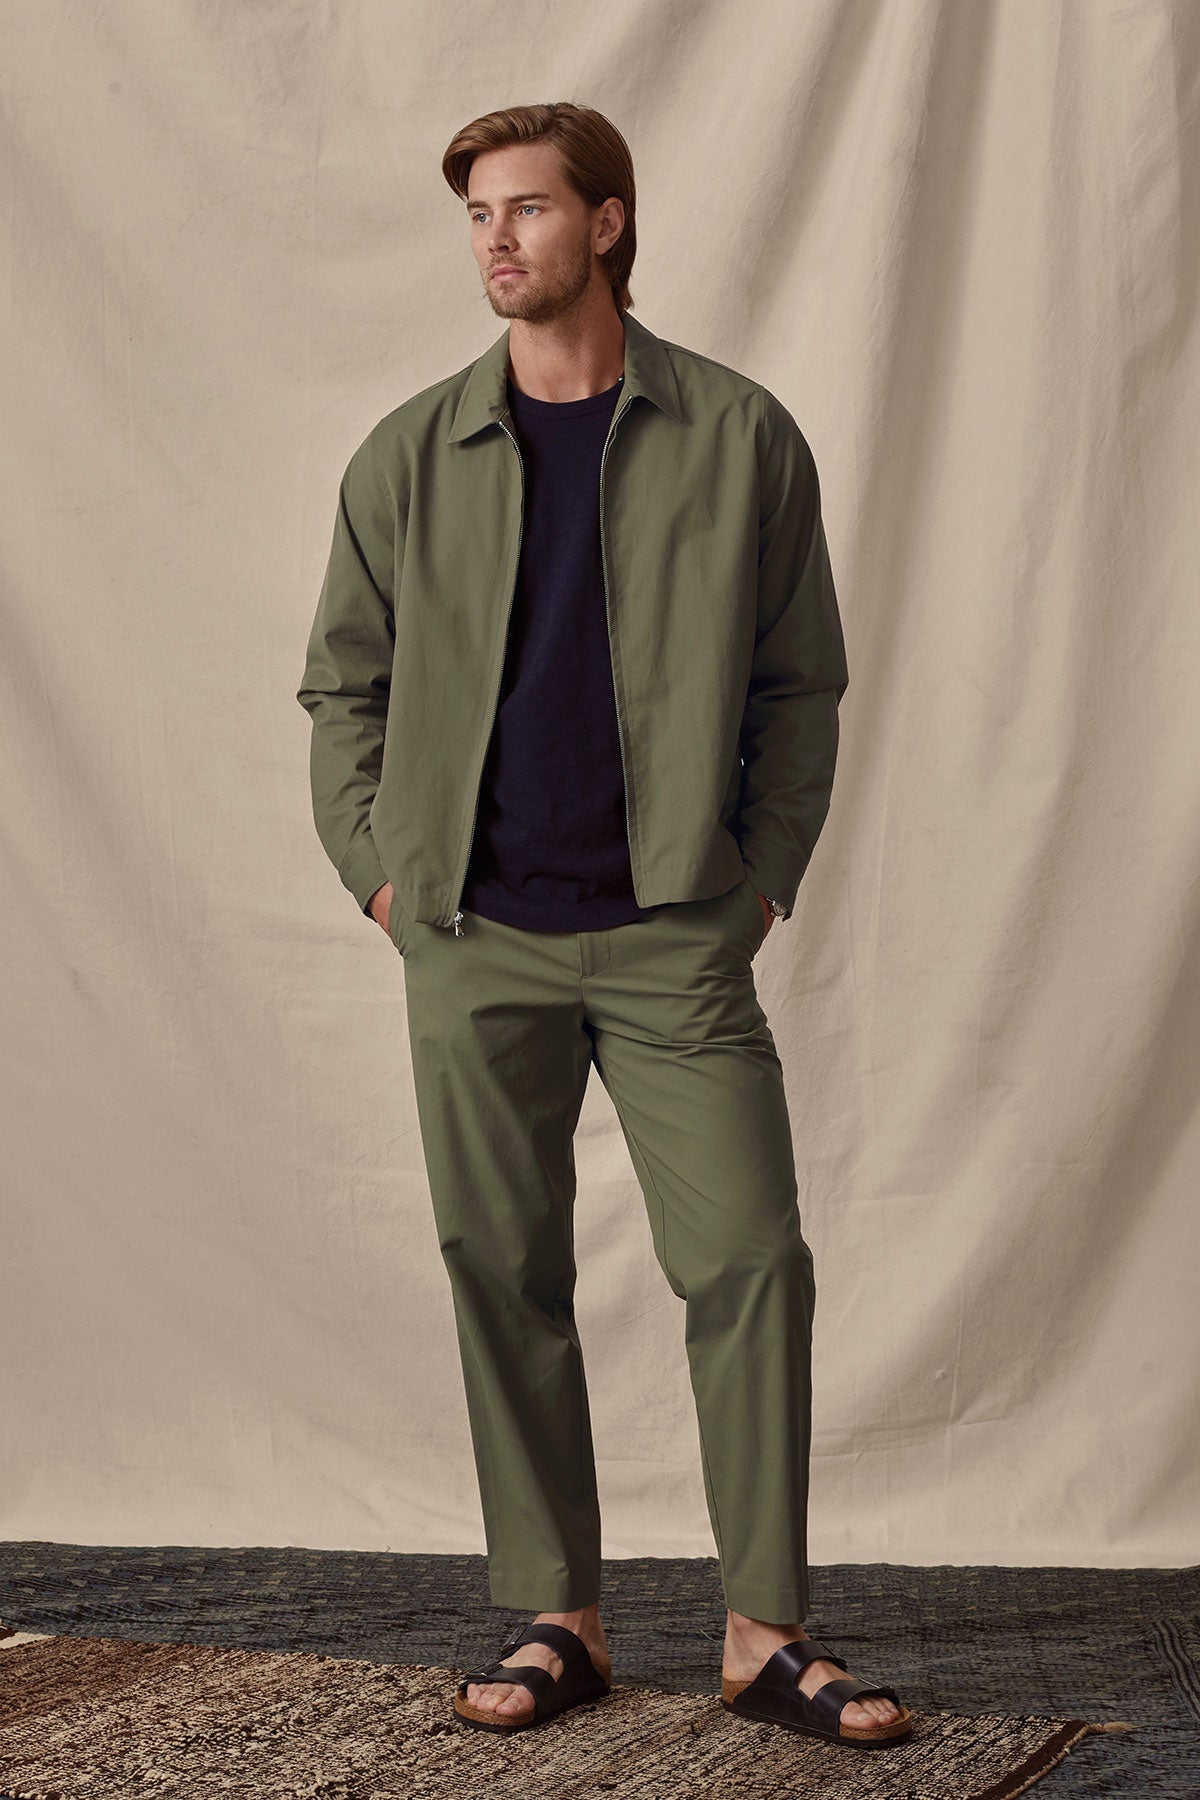 A man in a casual olive green jacket and STING POPLIN PANT trousers with a tailored style, made from a cotton blend, posing against a beige background by Velvet by Graham & Spencer.-36299670520001